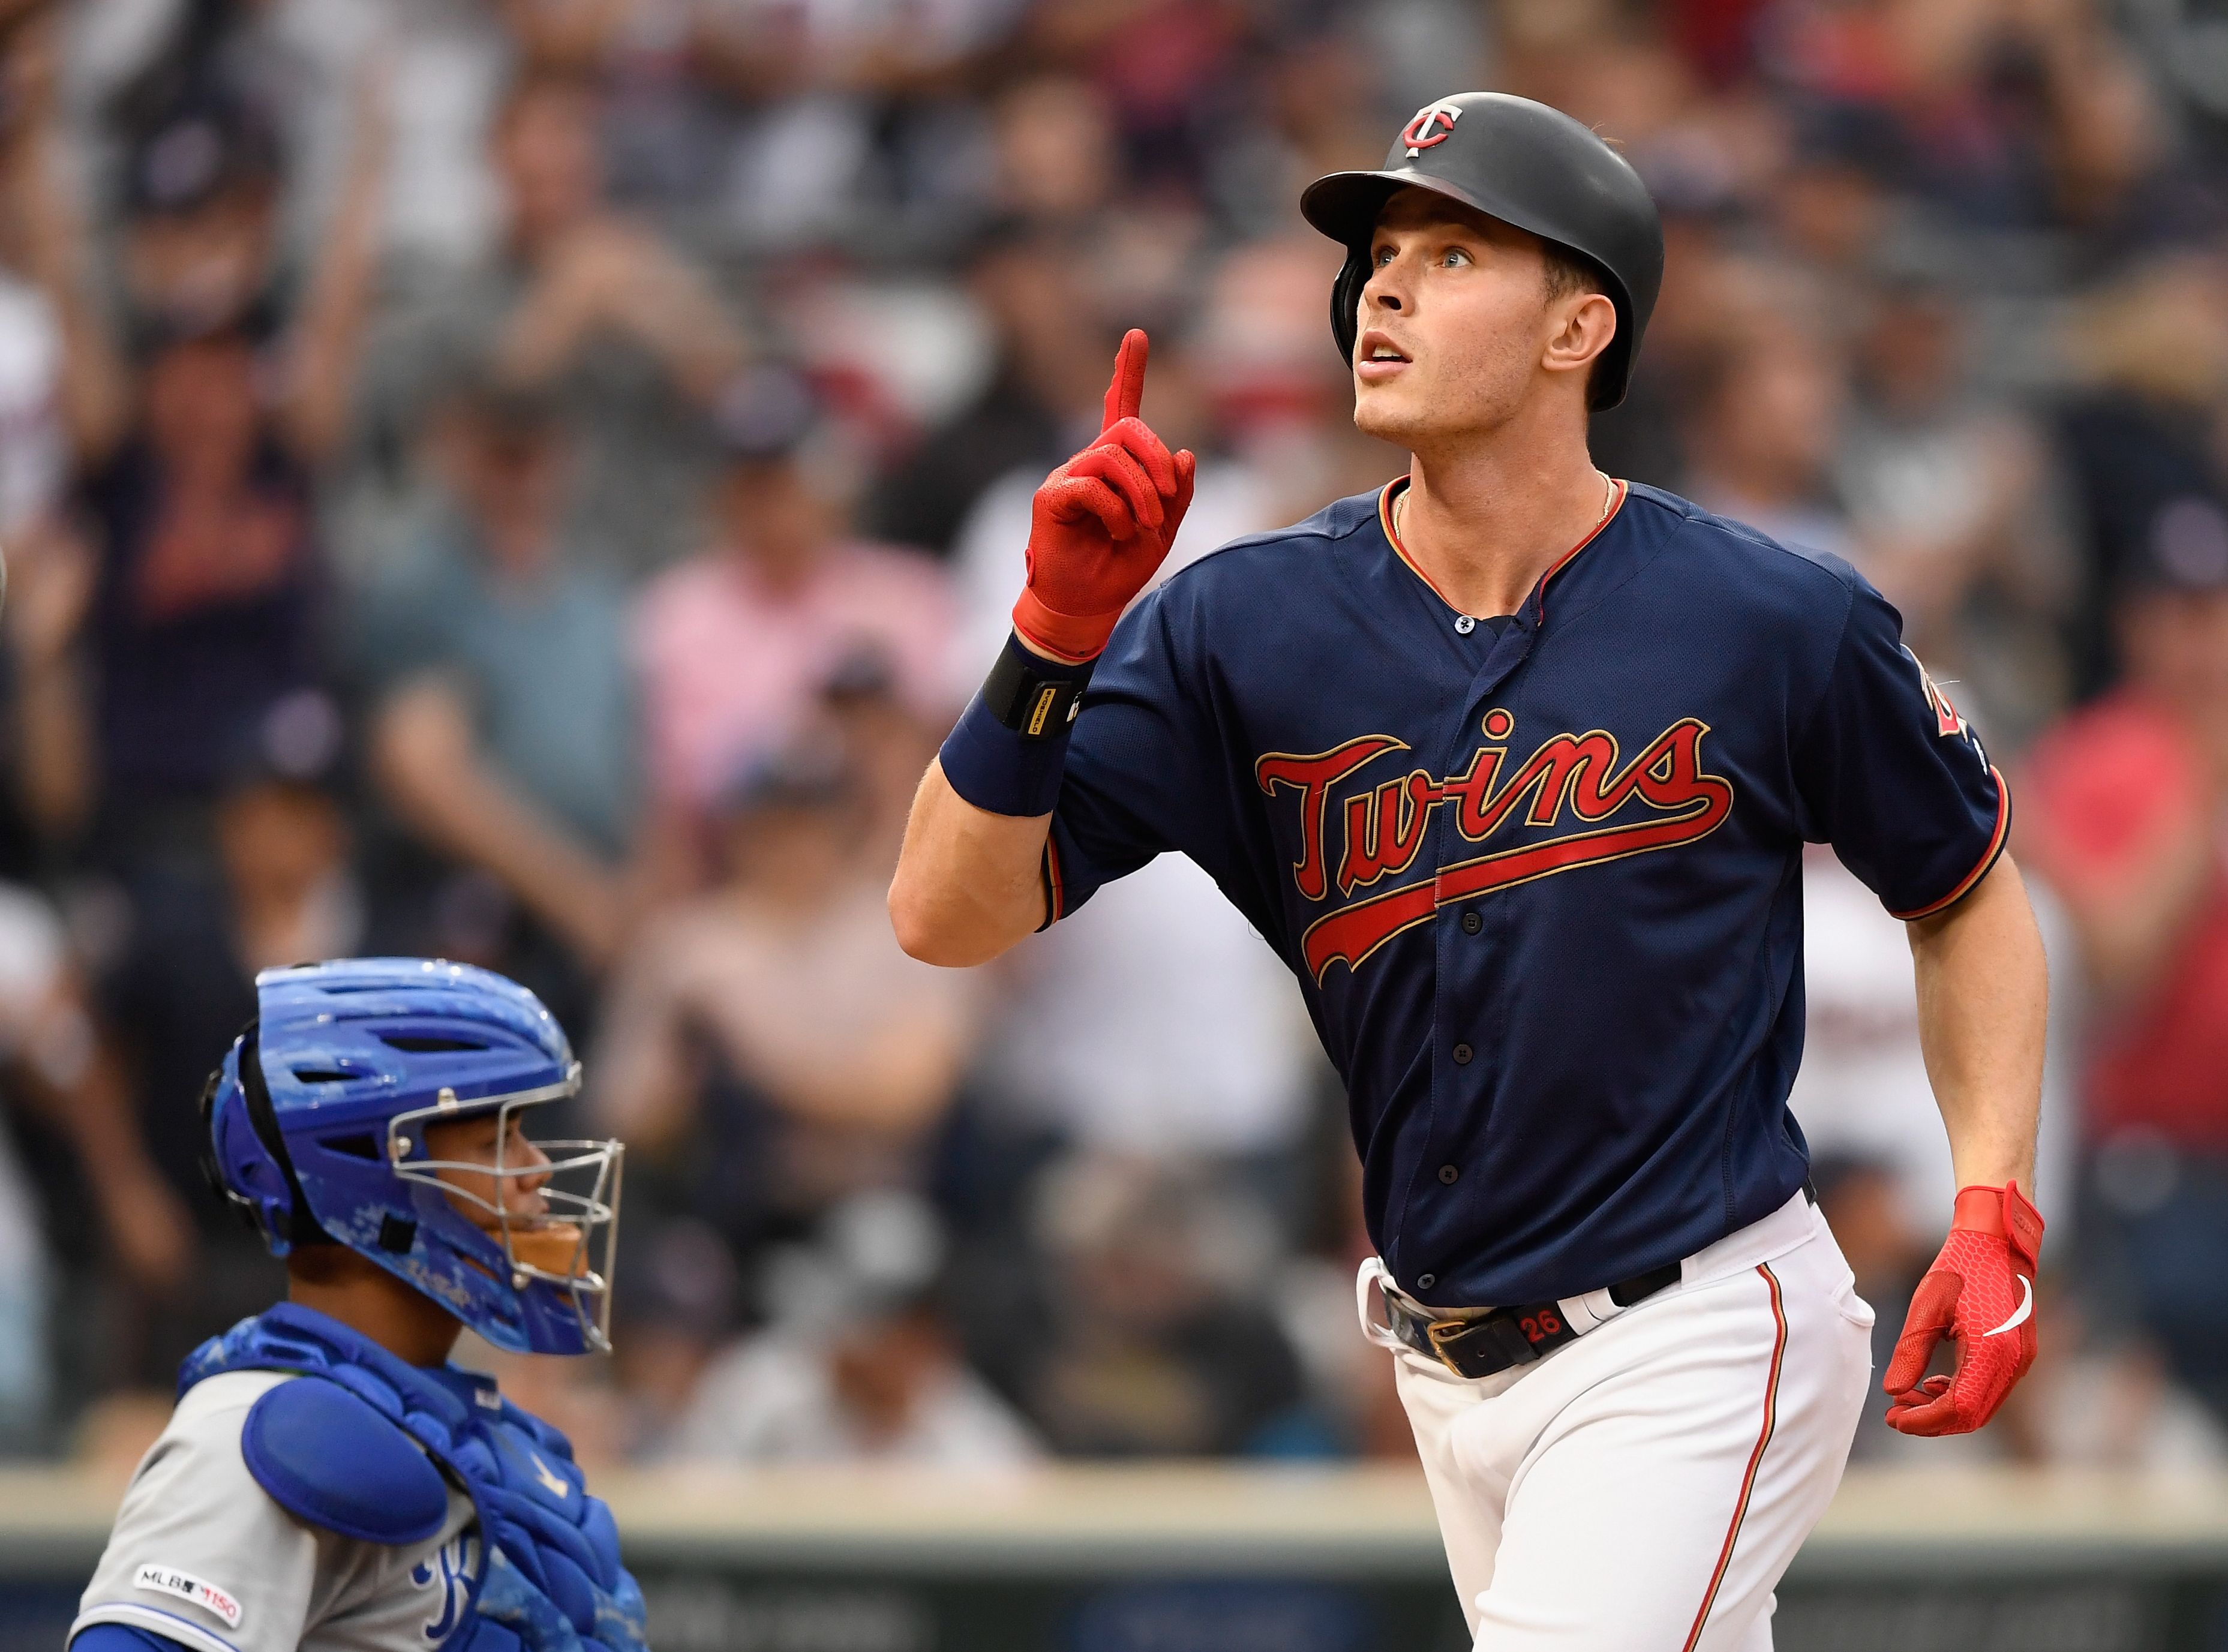 Max Kepler is the 'fertilizer to grow baseball in Europe' – DW – 09/06/2019